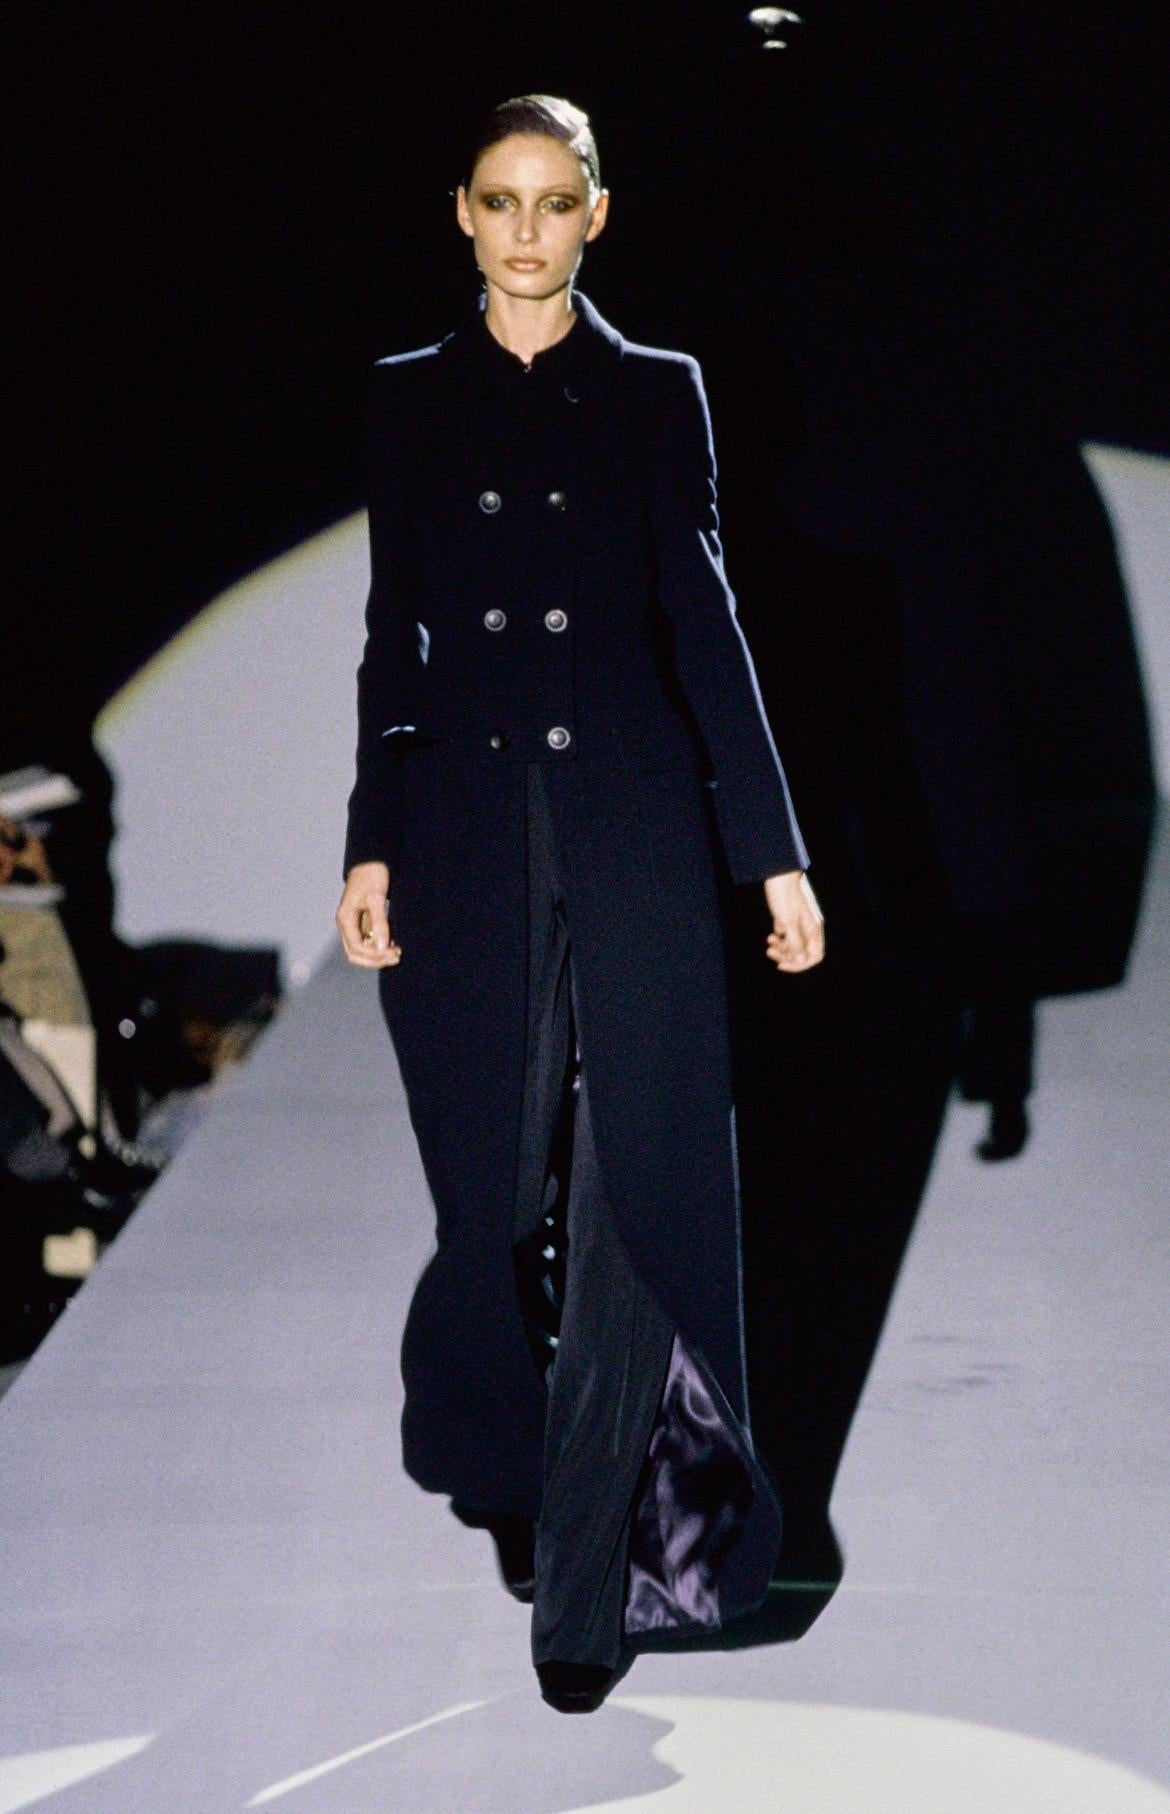 Presenting a fabulous navy wool oversized Gucci trench coat, designed by Tom Ford. From the Fall/Winter 1996 collection, this coat debuted on the season's runway and features a large abstract Gucci 'G' at the back that was heavily used in this